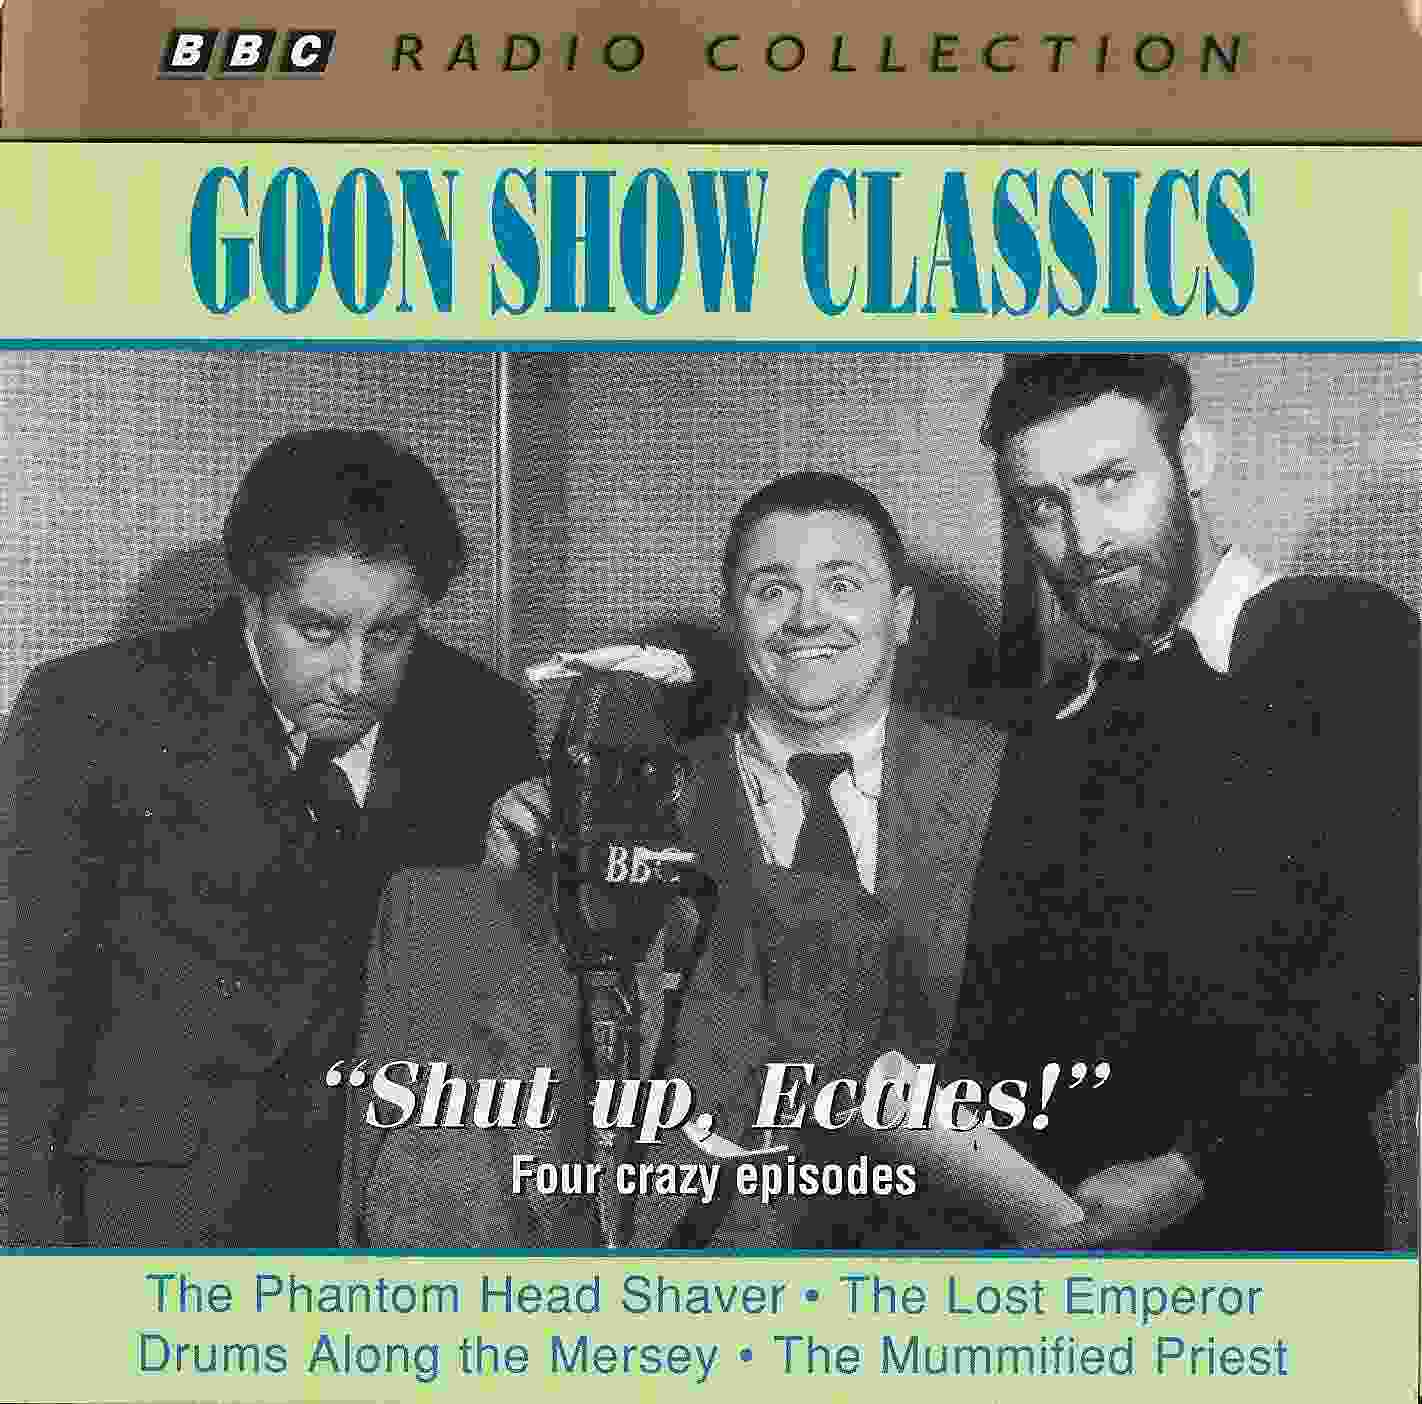 Picture of ZBBC 1725 CD Goon show classics 12 - Shut up Eccles ! by artist Spike Milligan from the BBC cds - Records and Tapes library